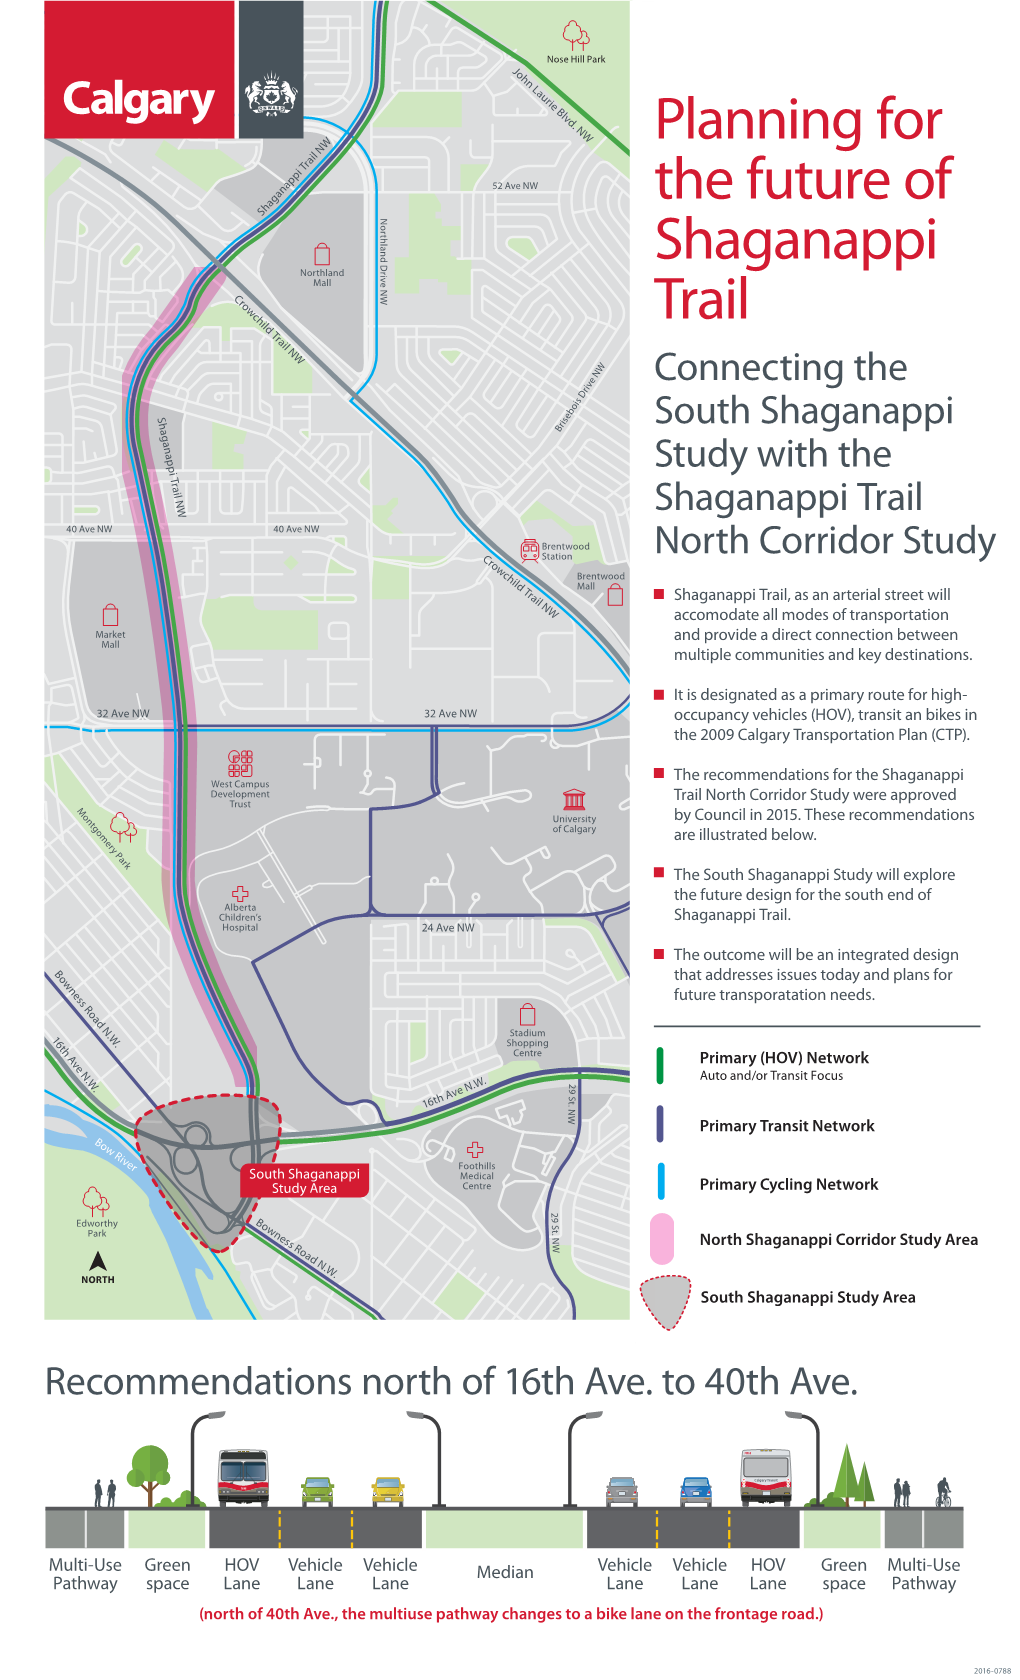 Planning for the Future of Shaganappi Trail